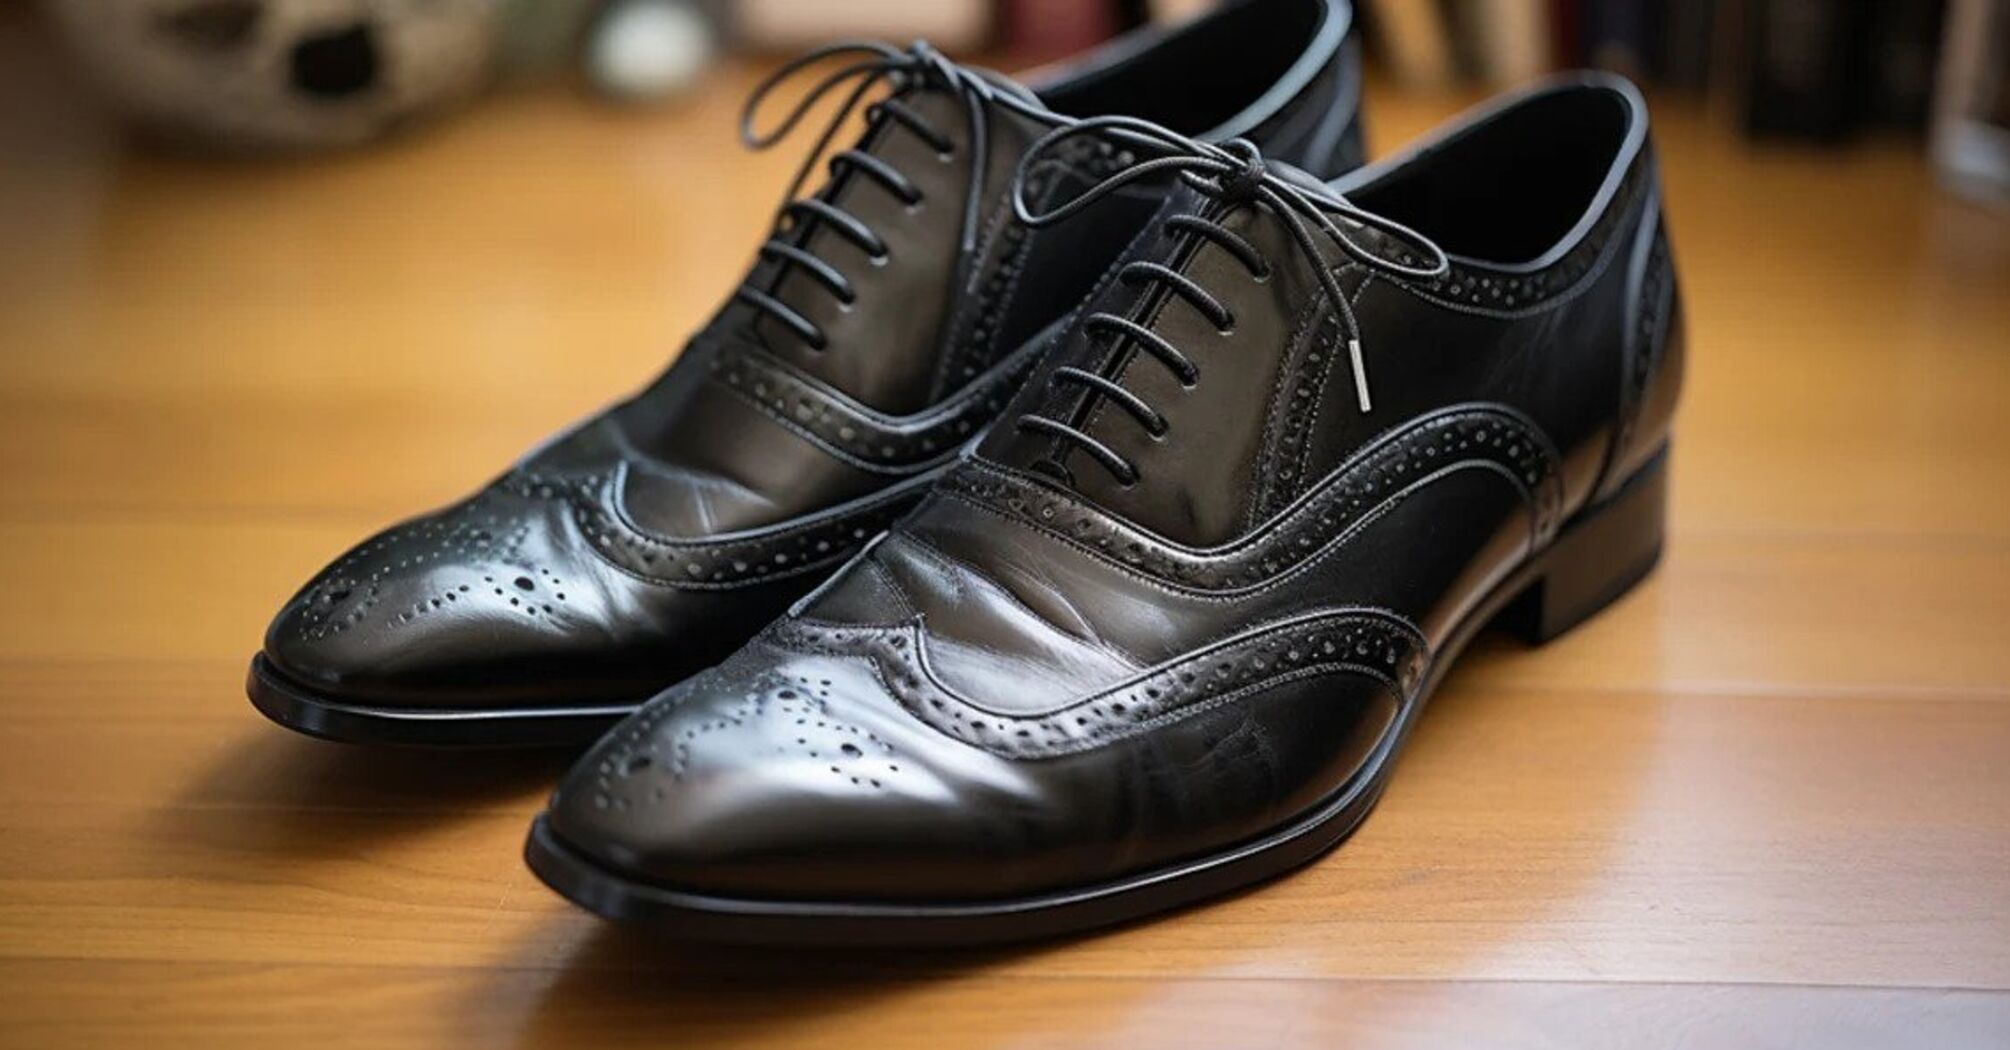 How to remove creases from leather shoes